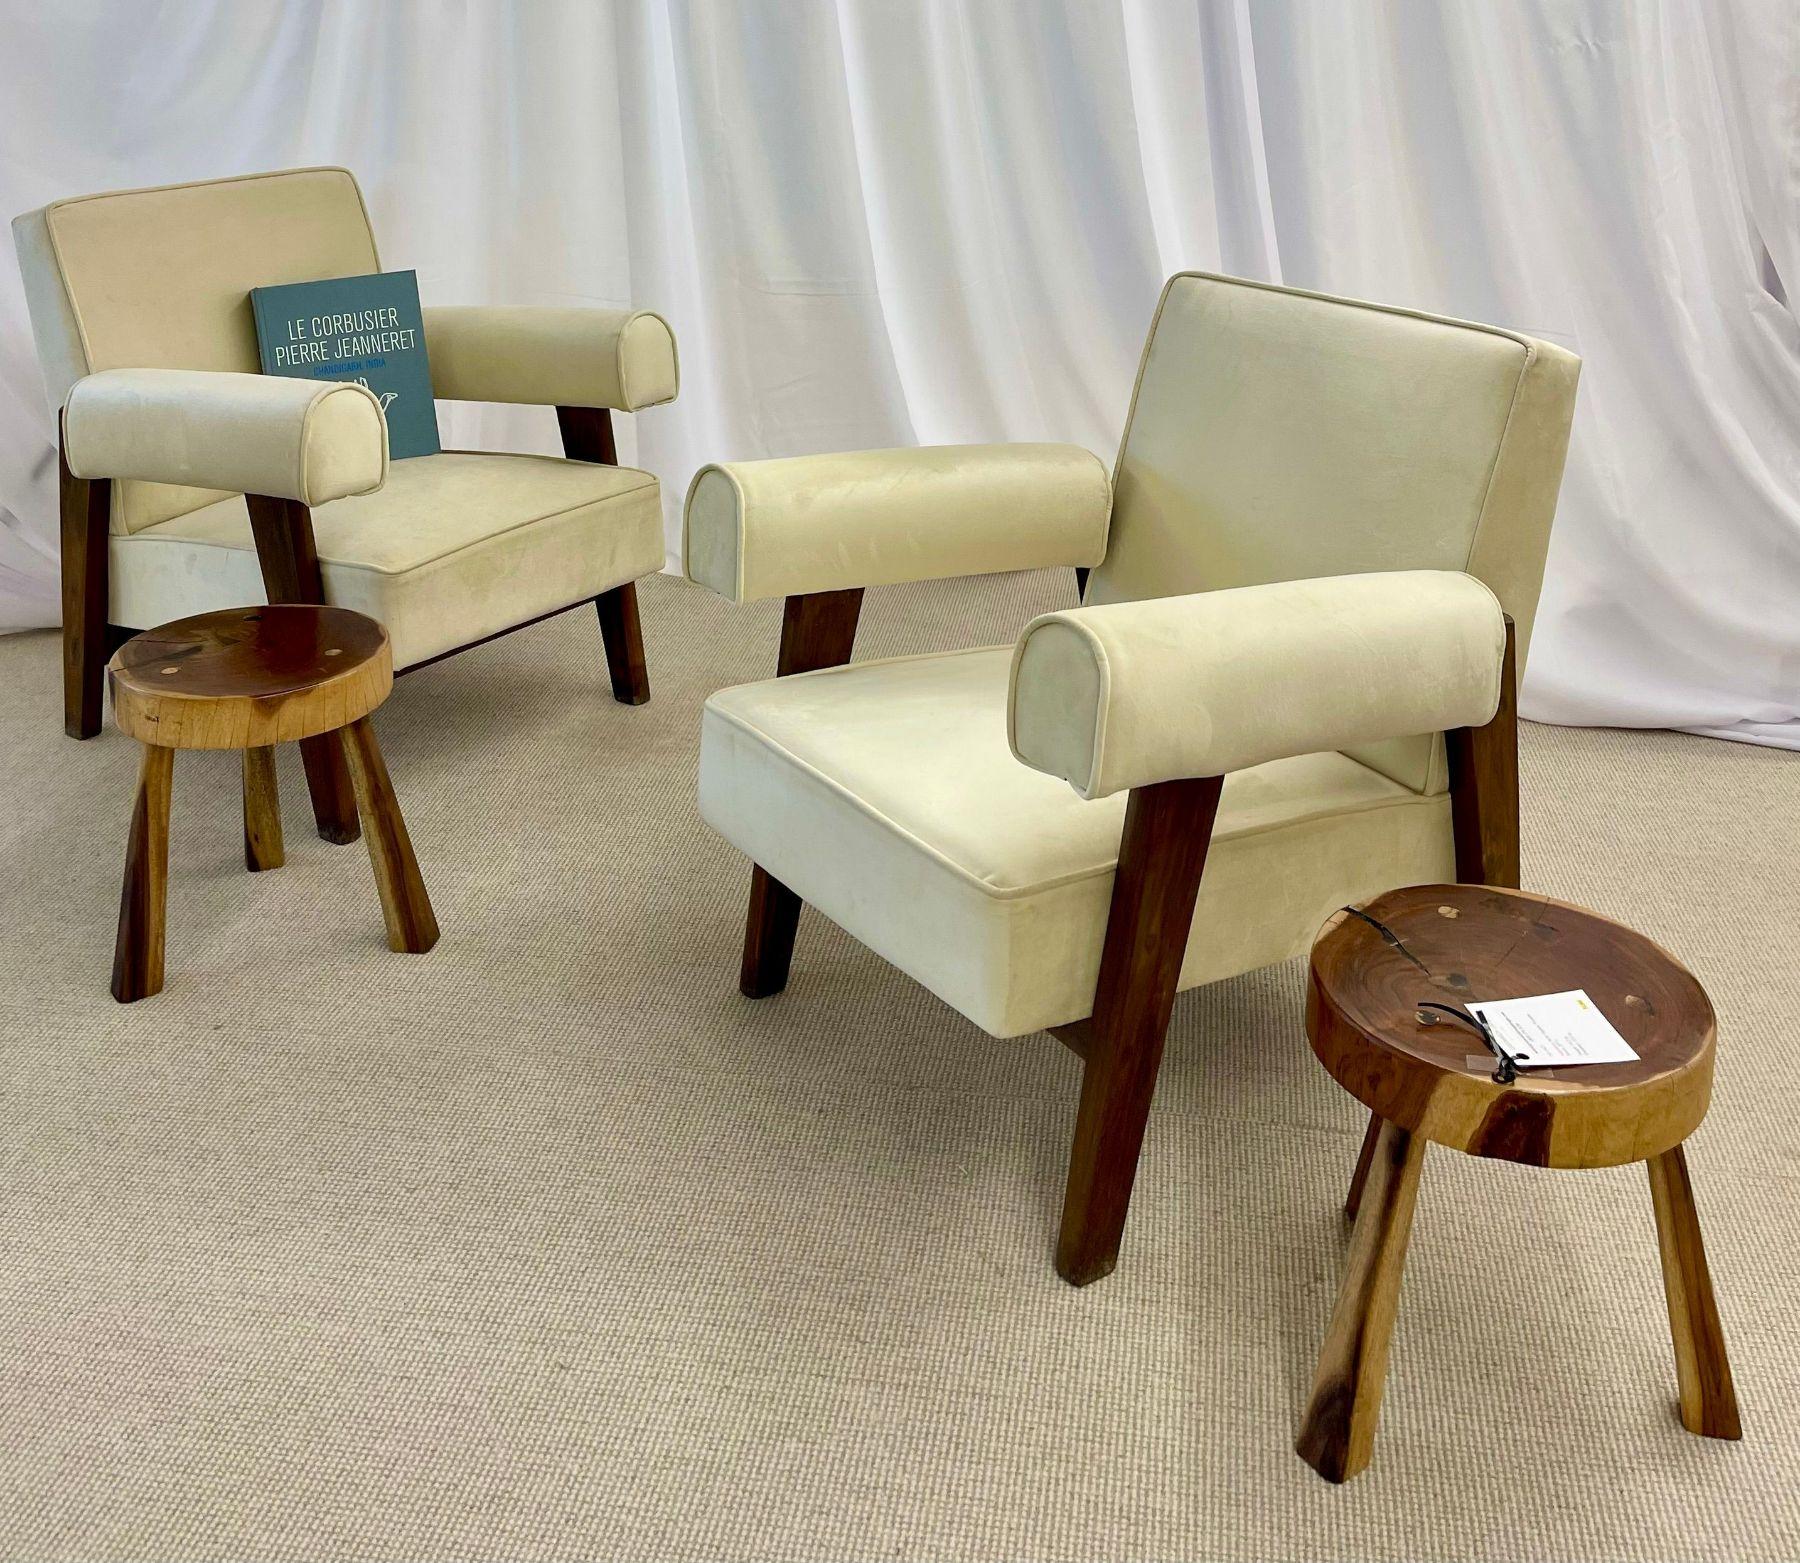 Pierre Jeanneret, French Mid-Century Modern, Bridge Chairs, Chandigarh c. 1960s In Good Condition For Sale In Stamford, CT